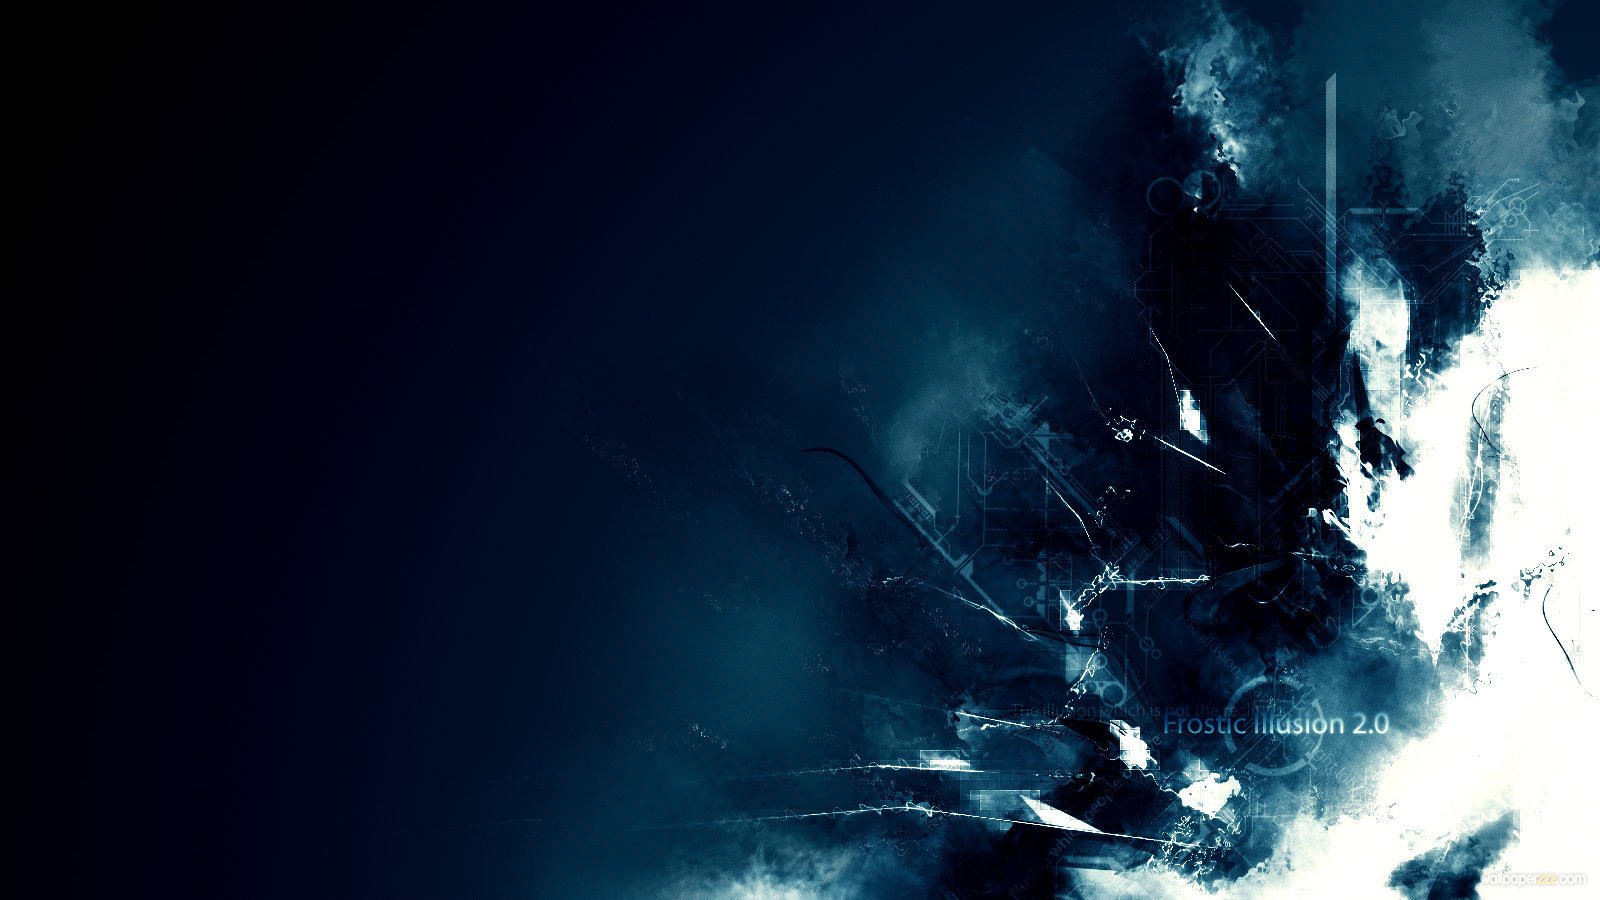 Download Frostic Illusion 2 Widescreen WallpaperFree Wallpaper